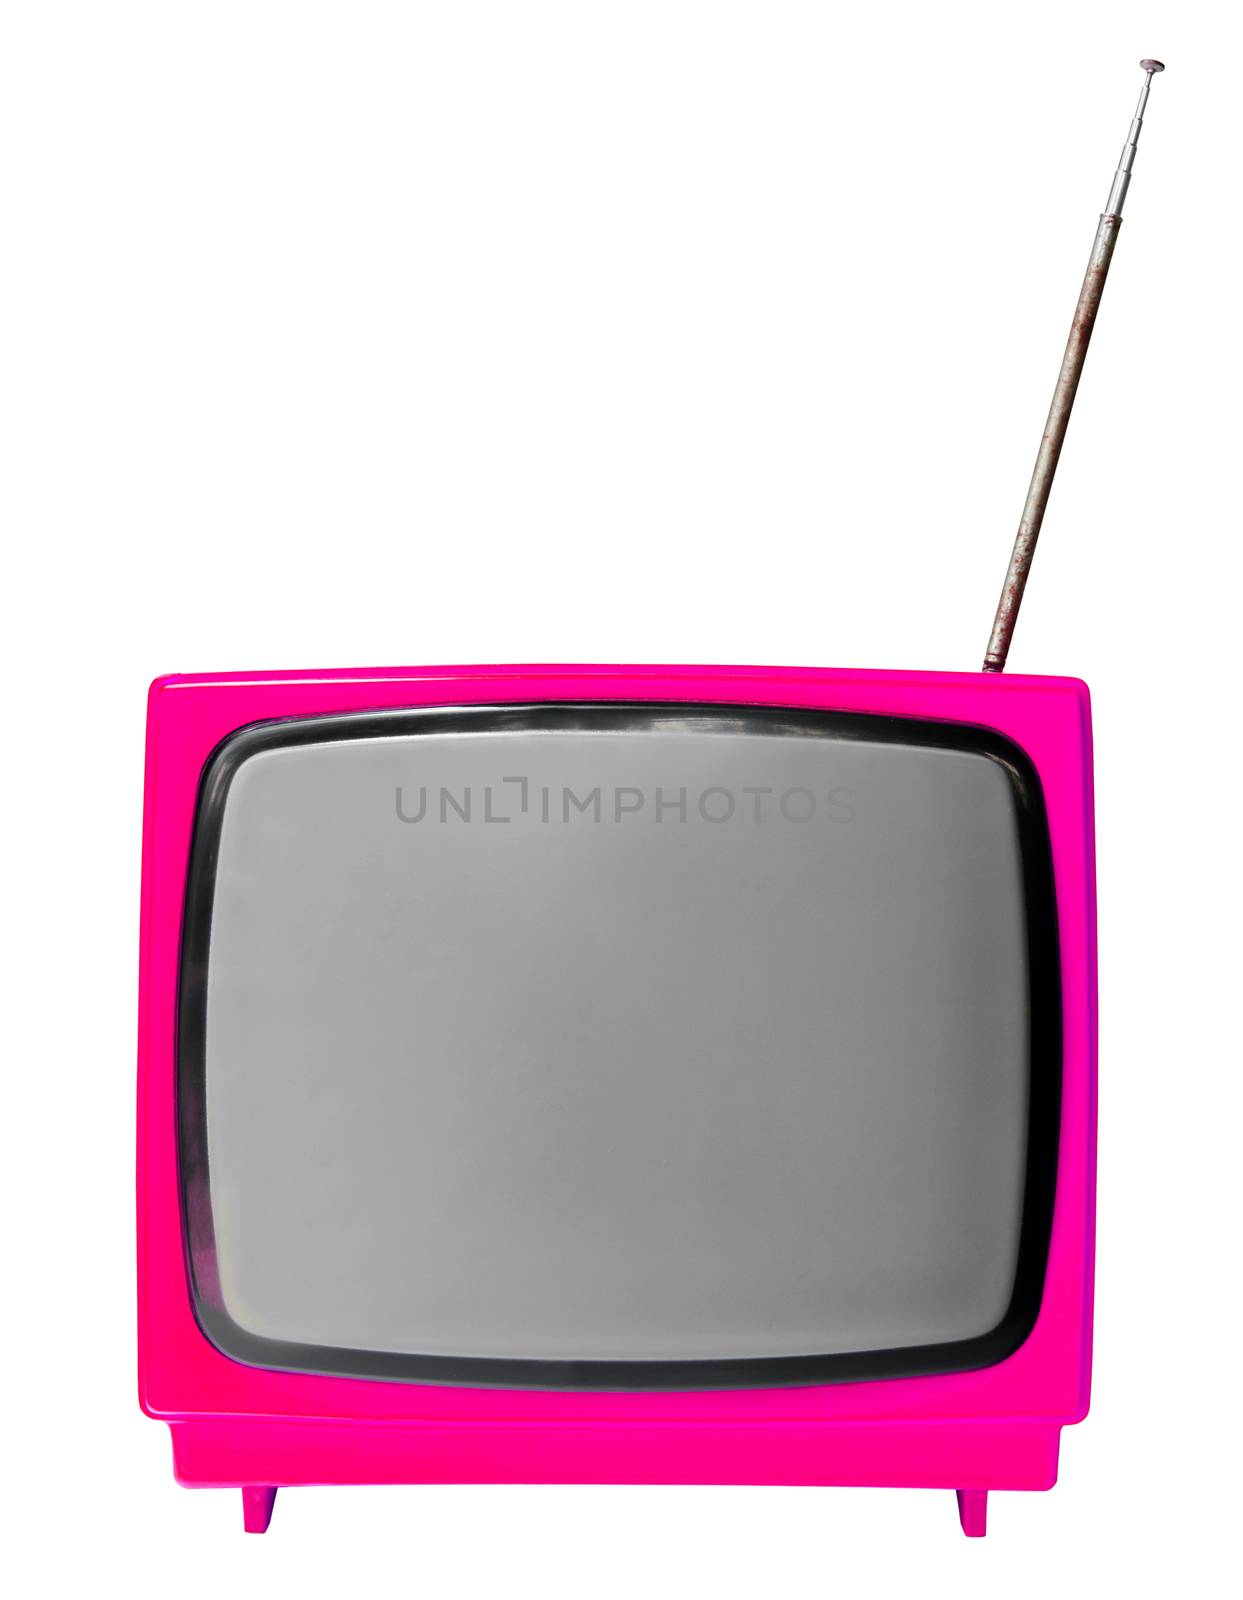 vintage television isolated on the white background by Gamjai